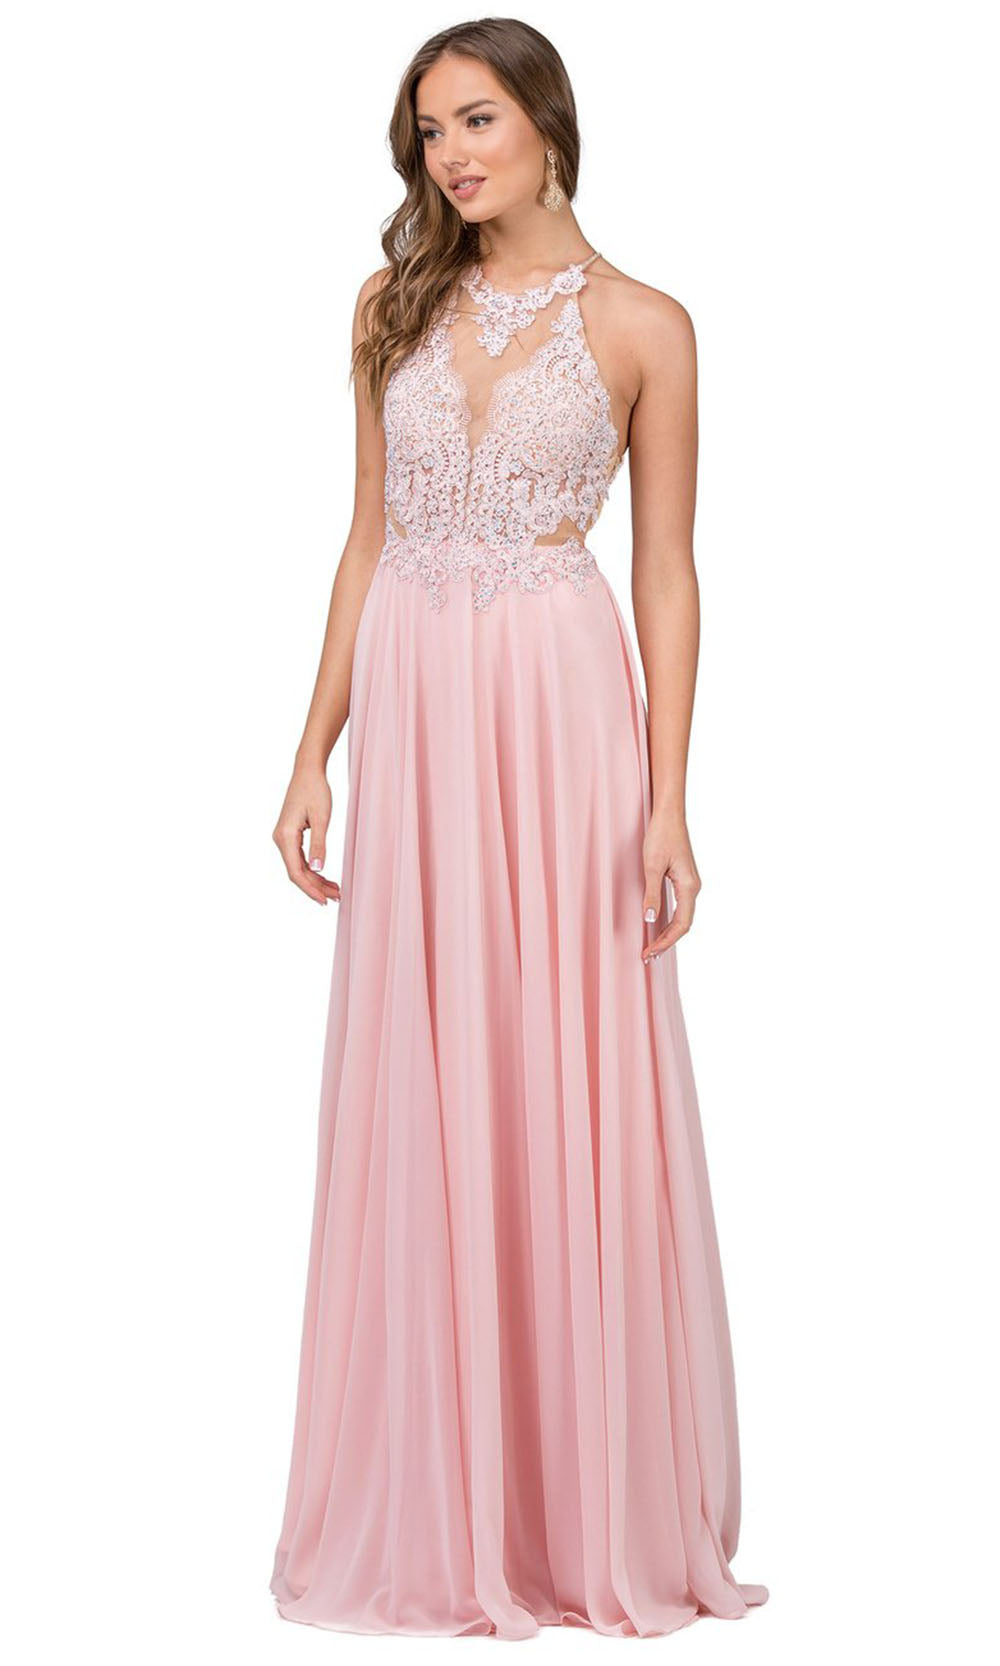 Dancing Queen - 2015 Embroidered Halter Neck A-Line Dress In Pink